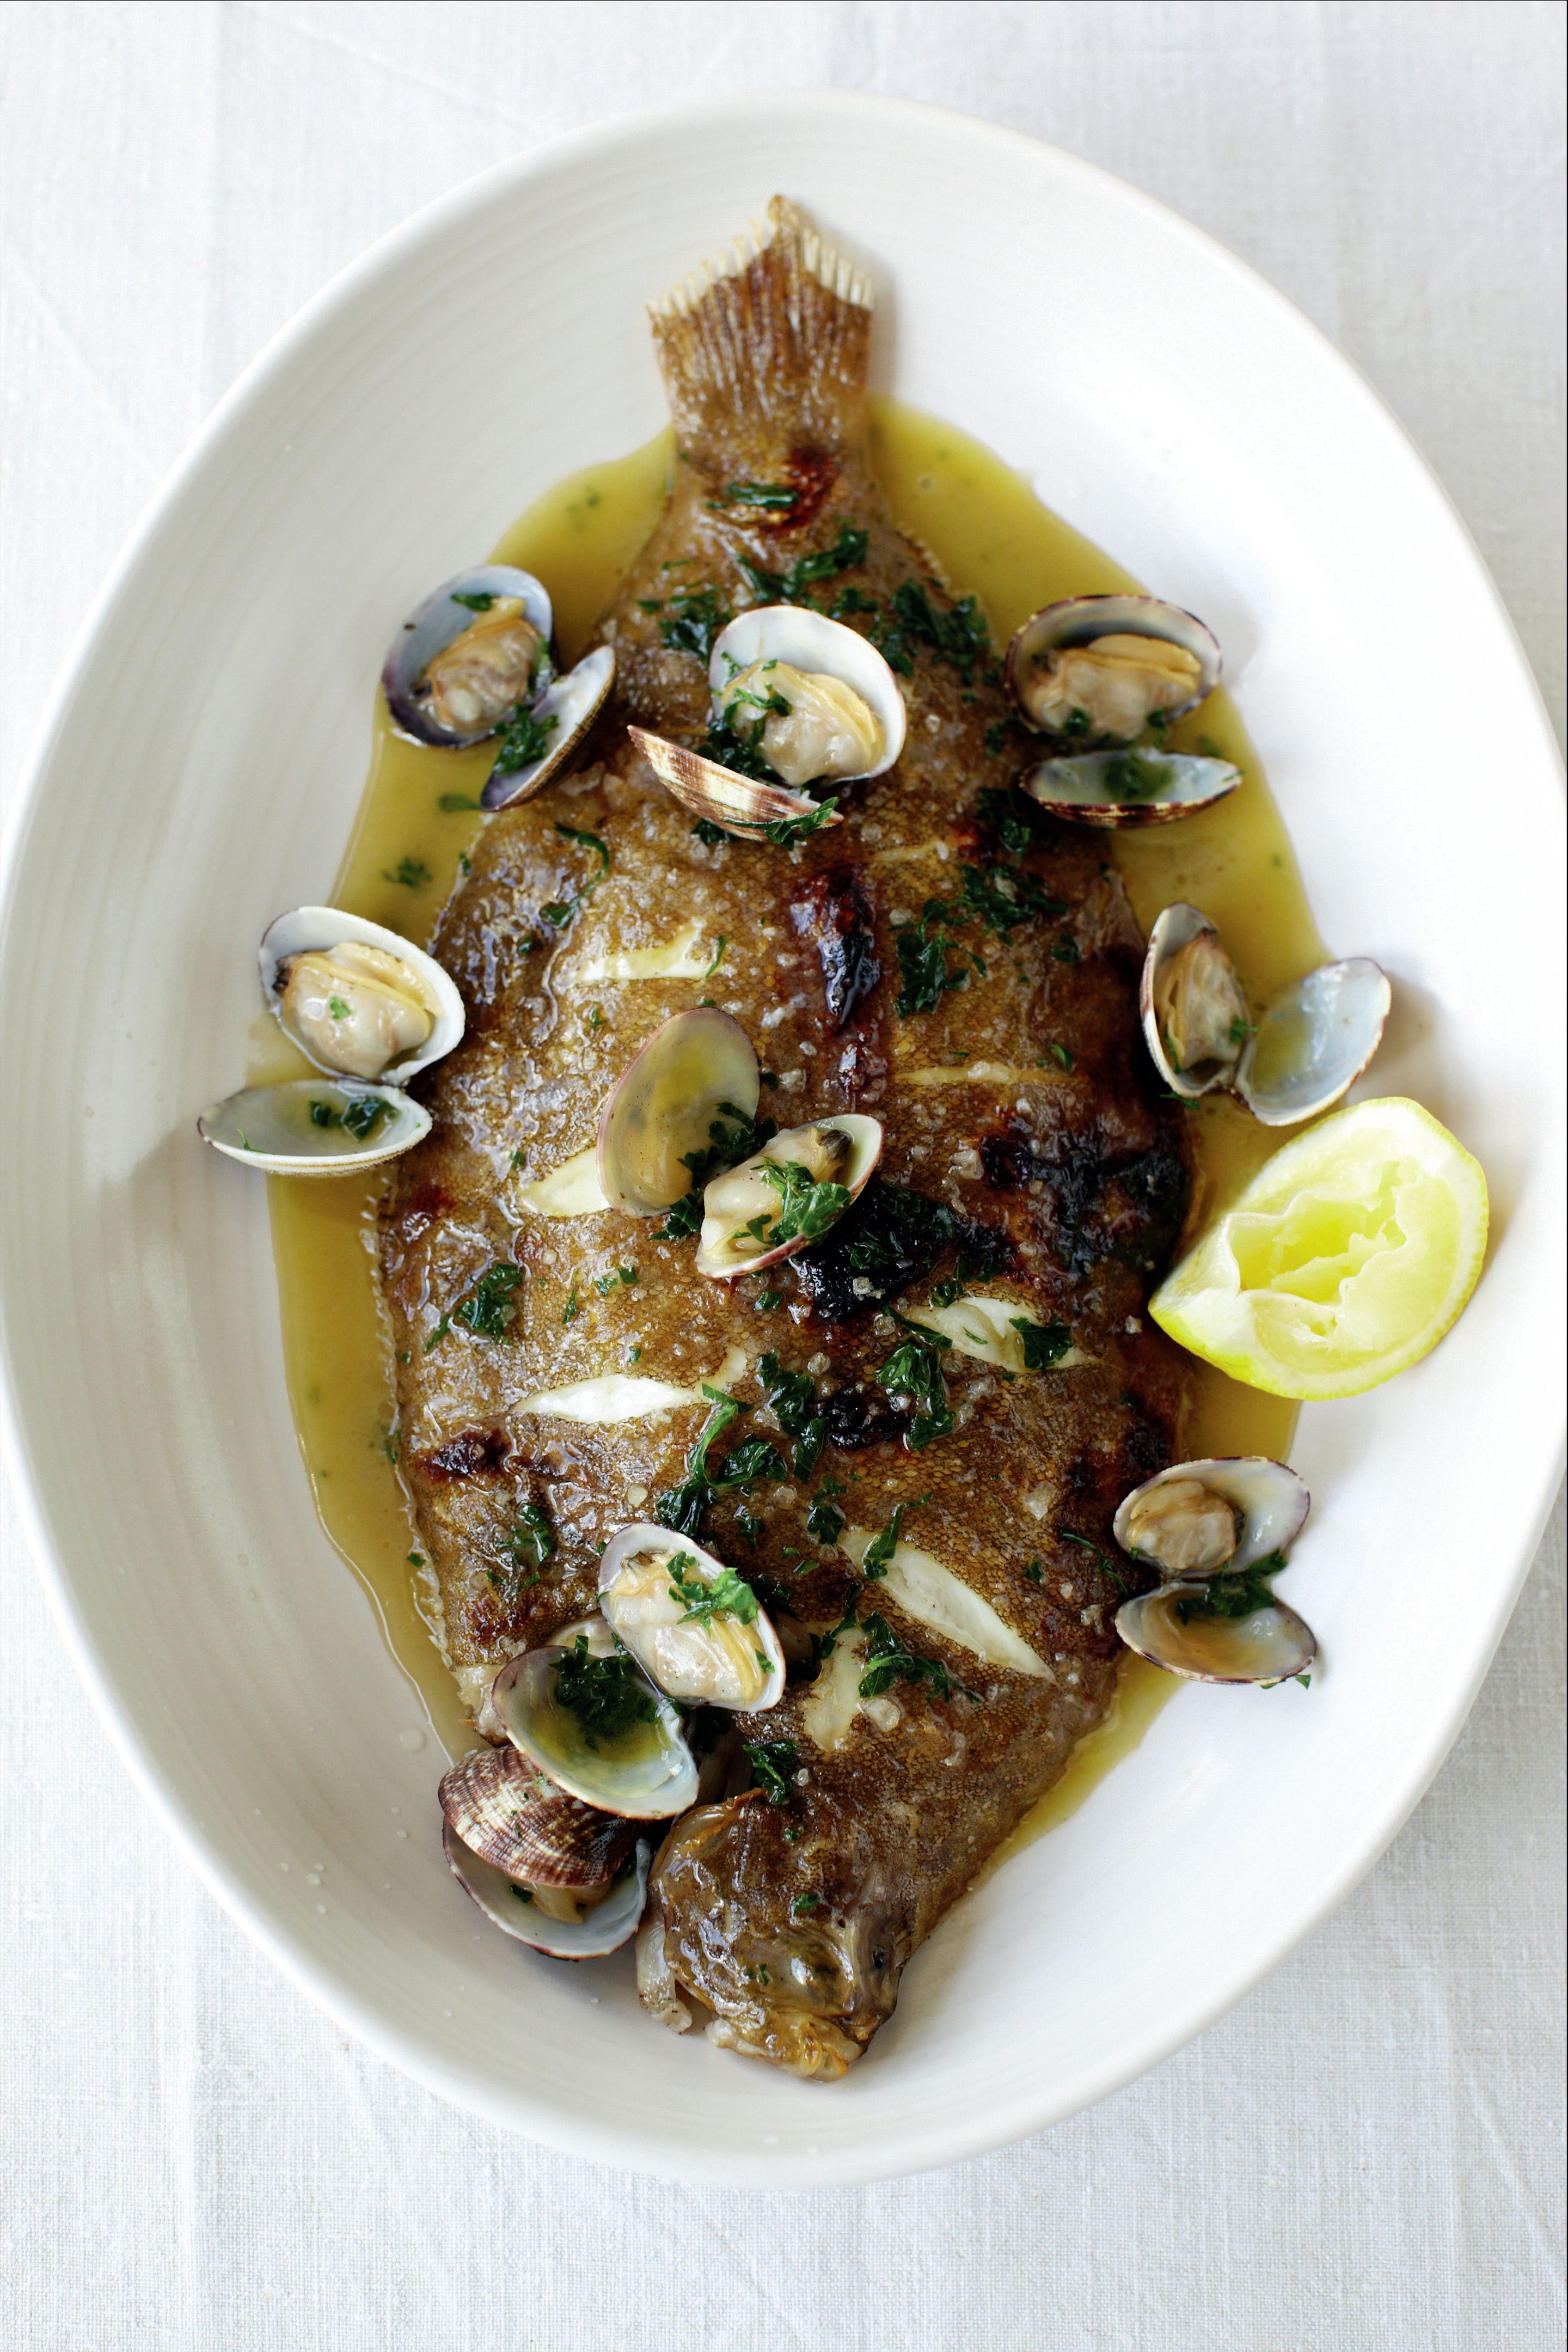 Lemon sole on the bone with parsley and clam butter